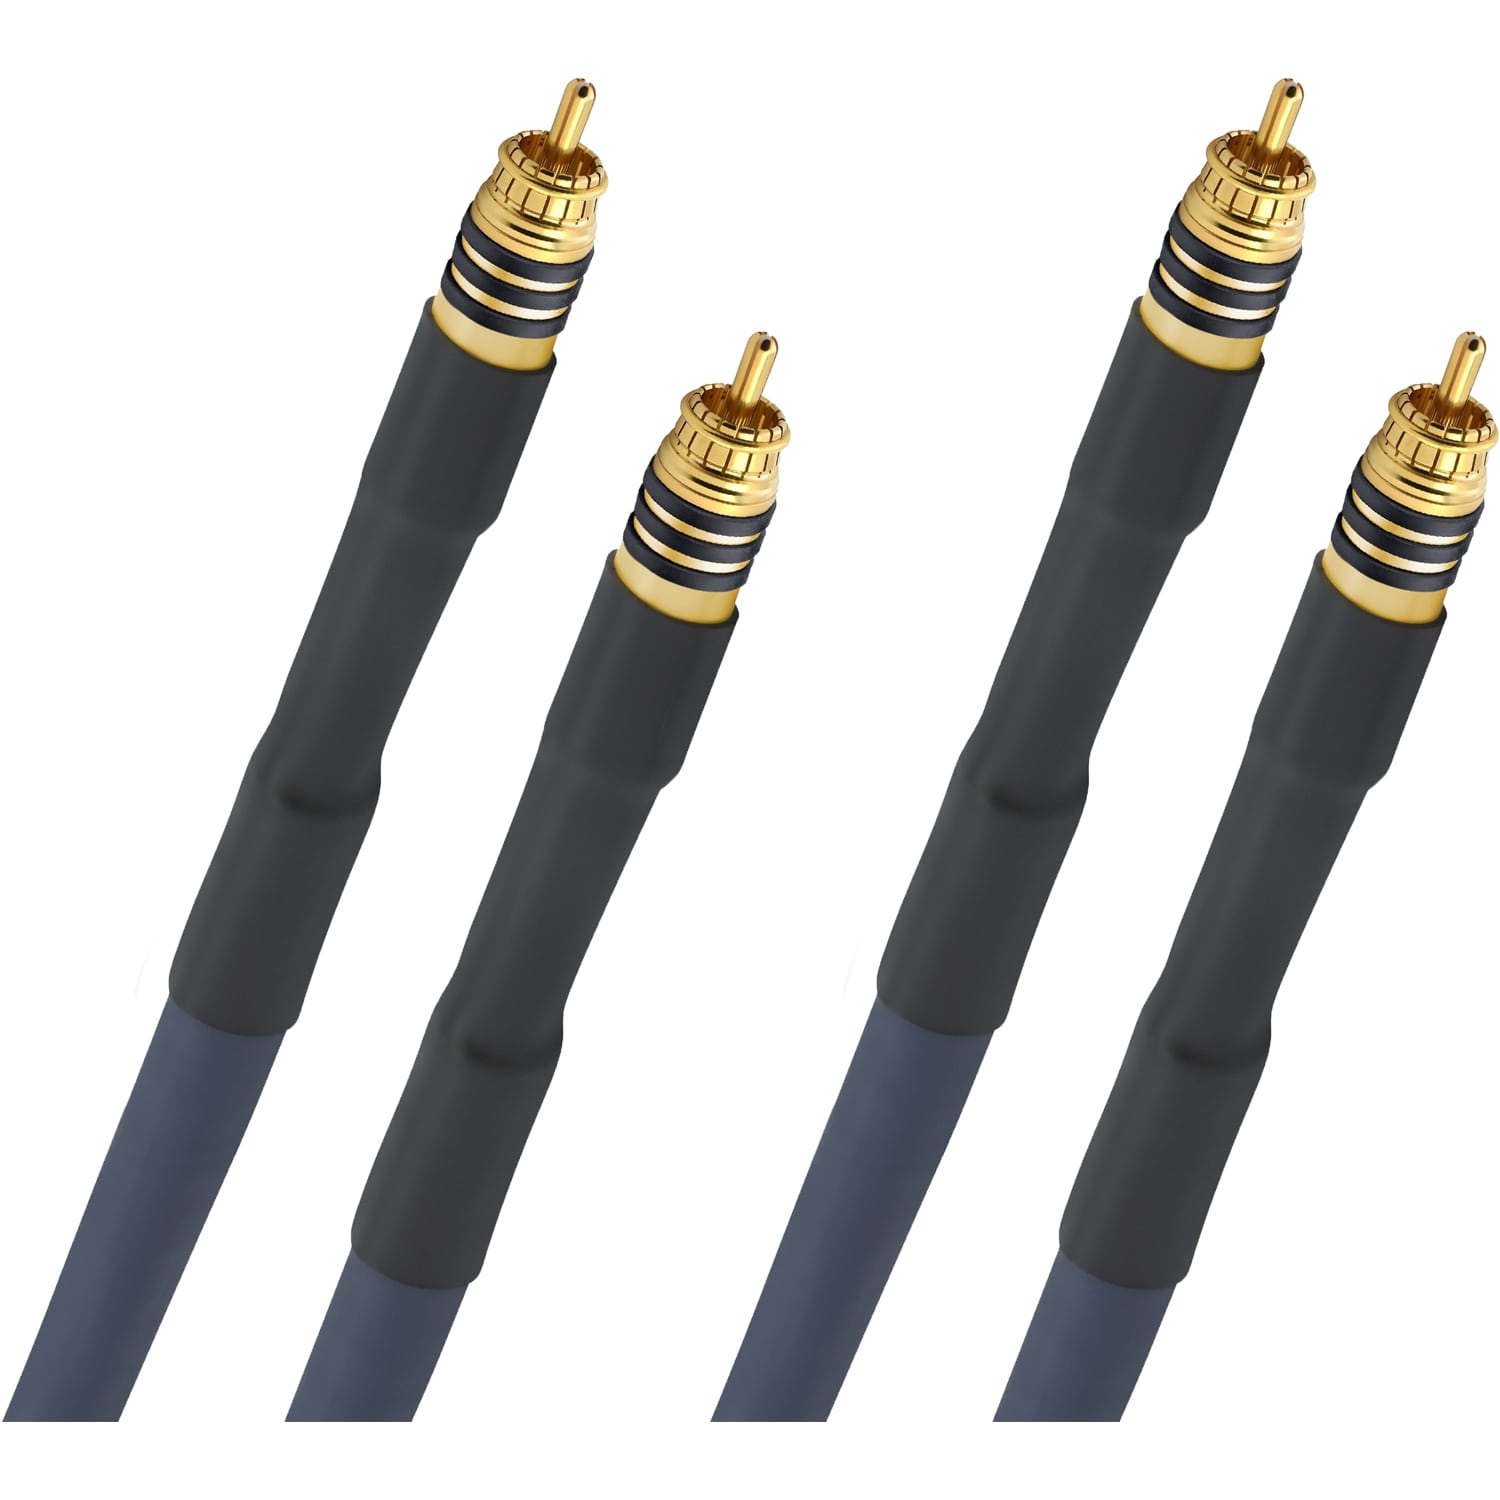 Кабели межблочные аудио Oehlbach STATE OF THE ART XXL Cable RCA, 2x1,25m, gold, D1C13113 кабели межблочные аудио oehlbach performance nf 1 master set 1 x 2 0m blue d1c2035